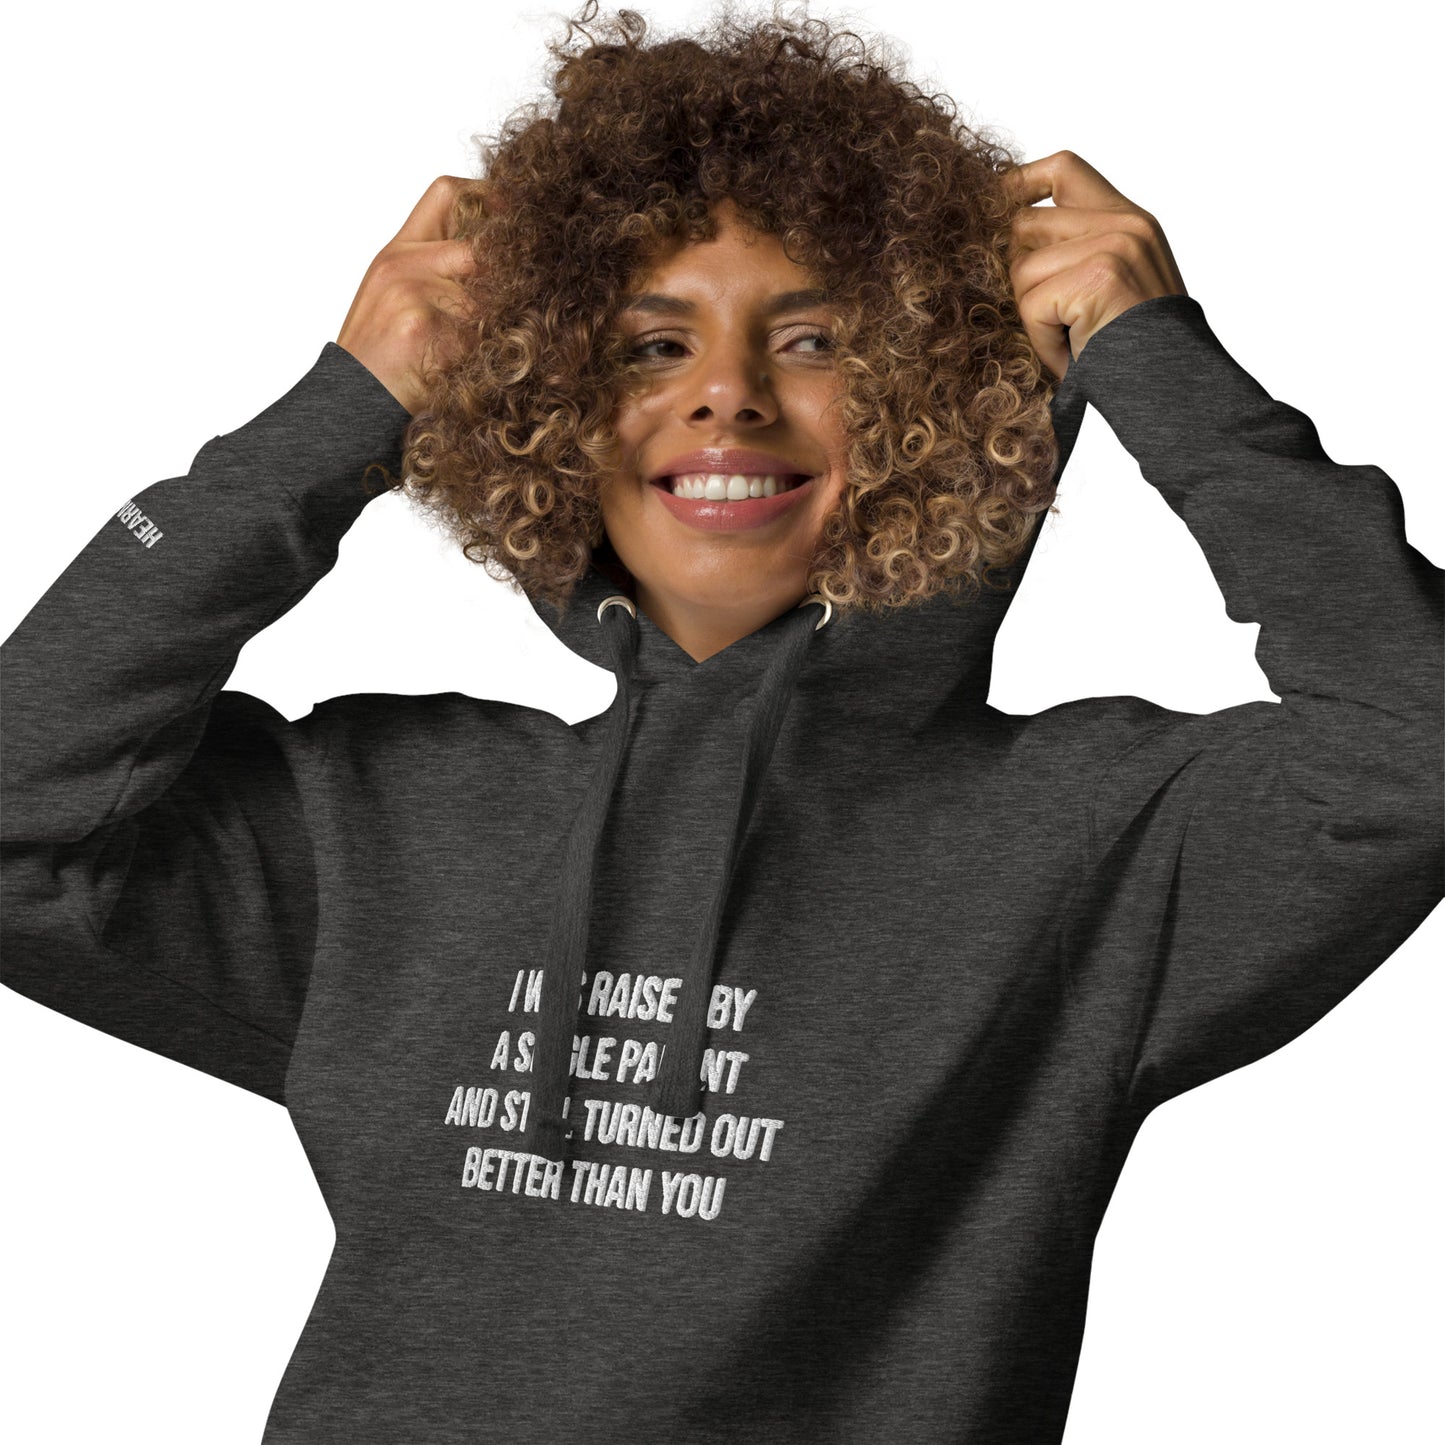 I Was Raised By A Single Parent Embroidered Unisex Hoodie